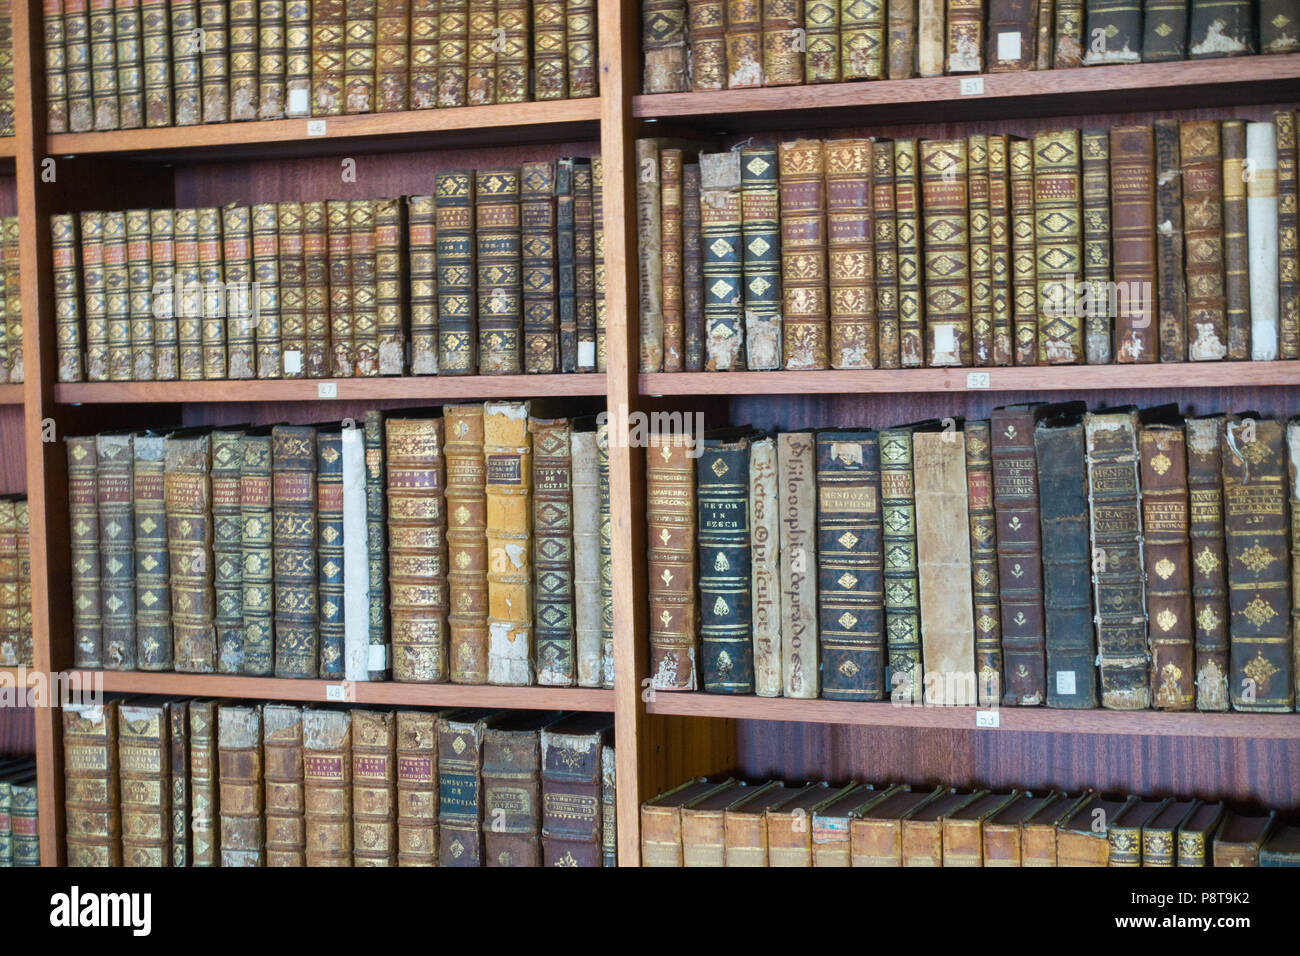 Shelves of ancient books Stock Photo